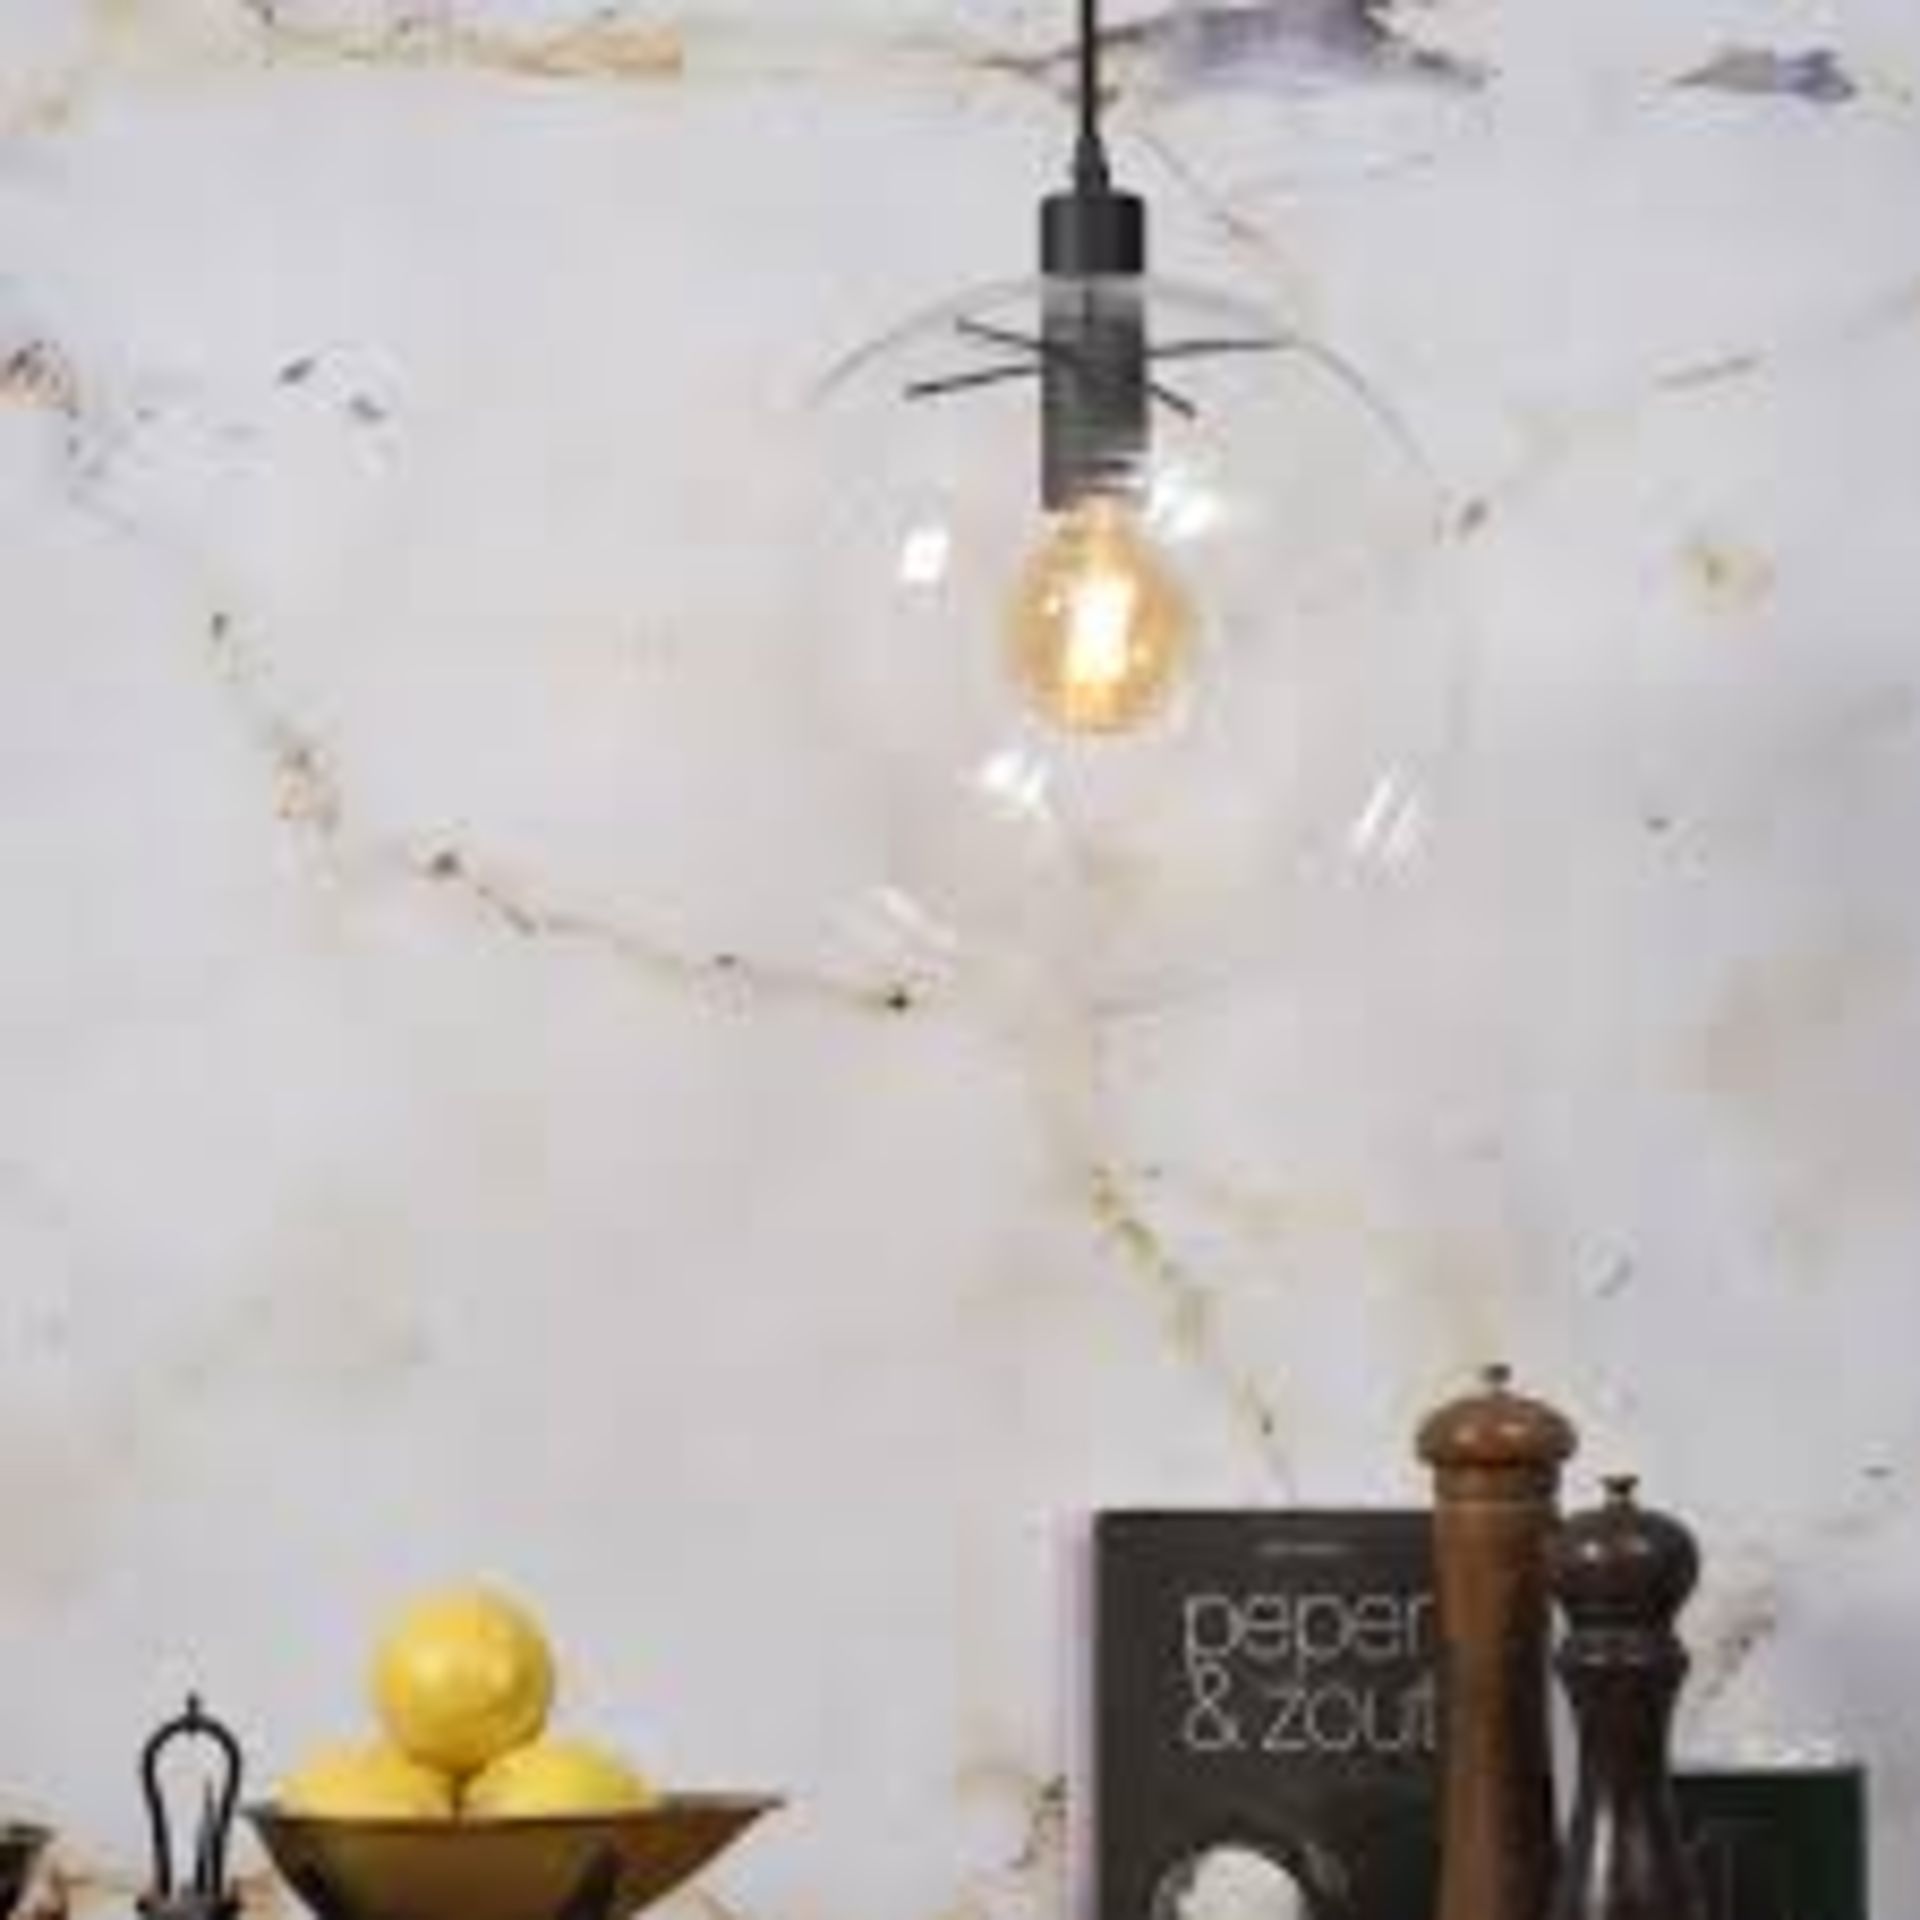 Boxed Black Warsaw Single Drop Globe Pendant Light RRP £130 (16838) (Pictures Are For Illustration